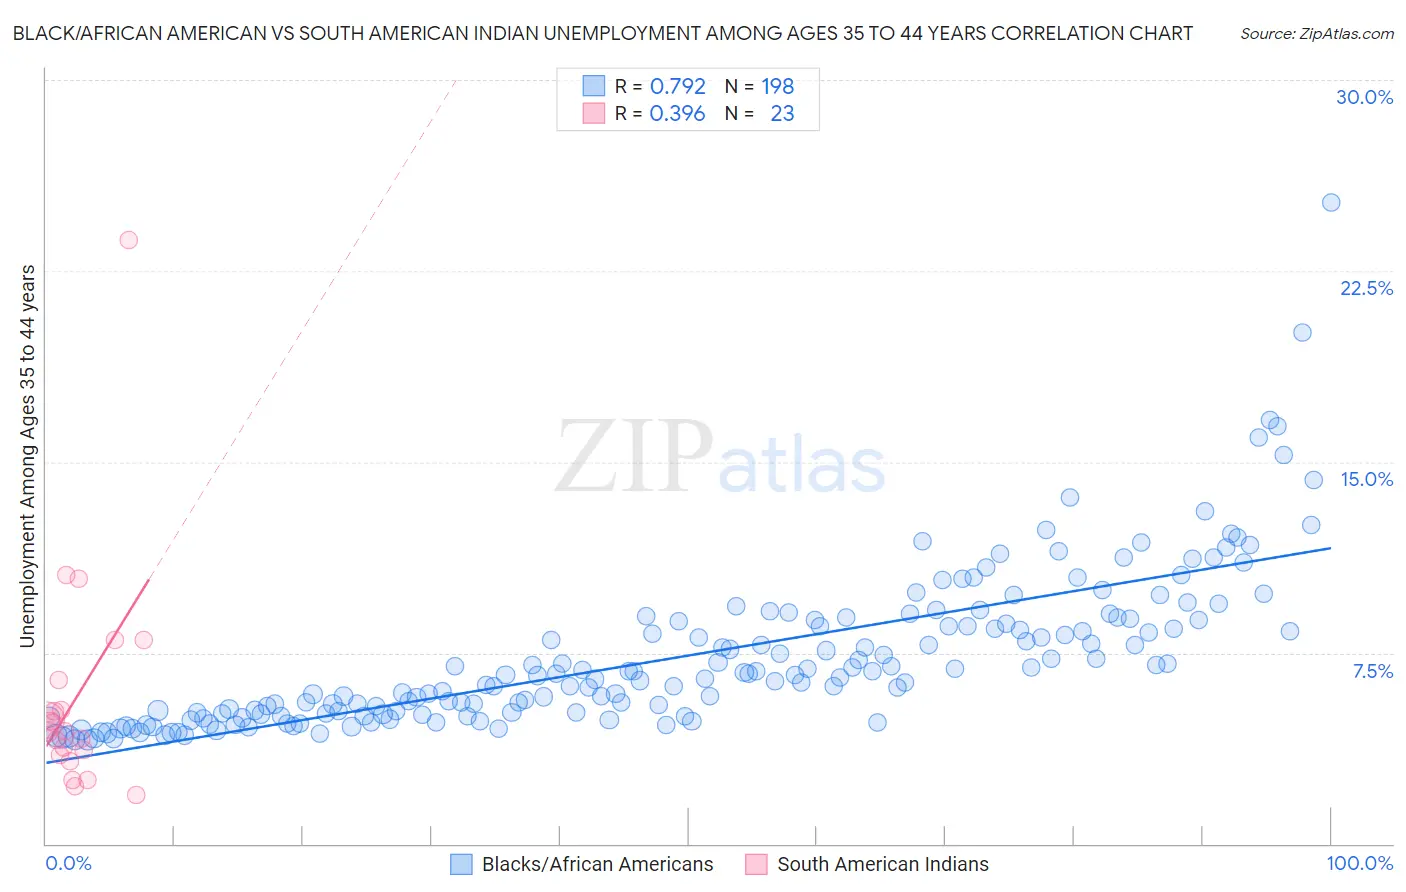 Black/African American vs South American Indian Unemployment Among Ages 35 to 44 years